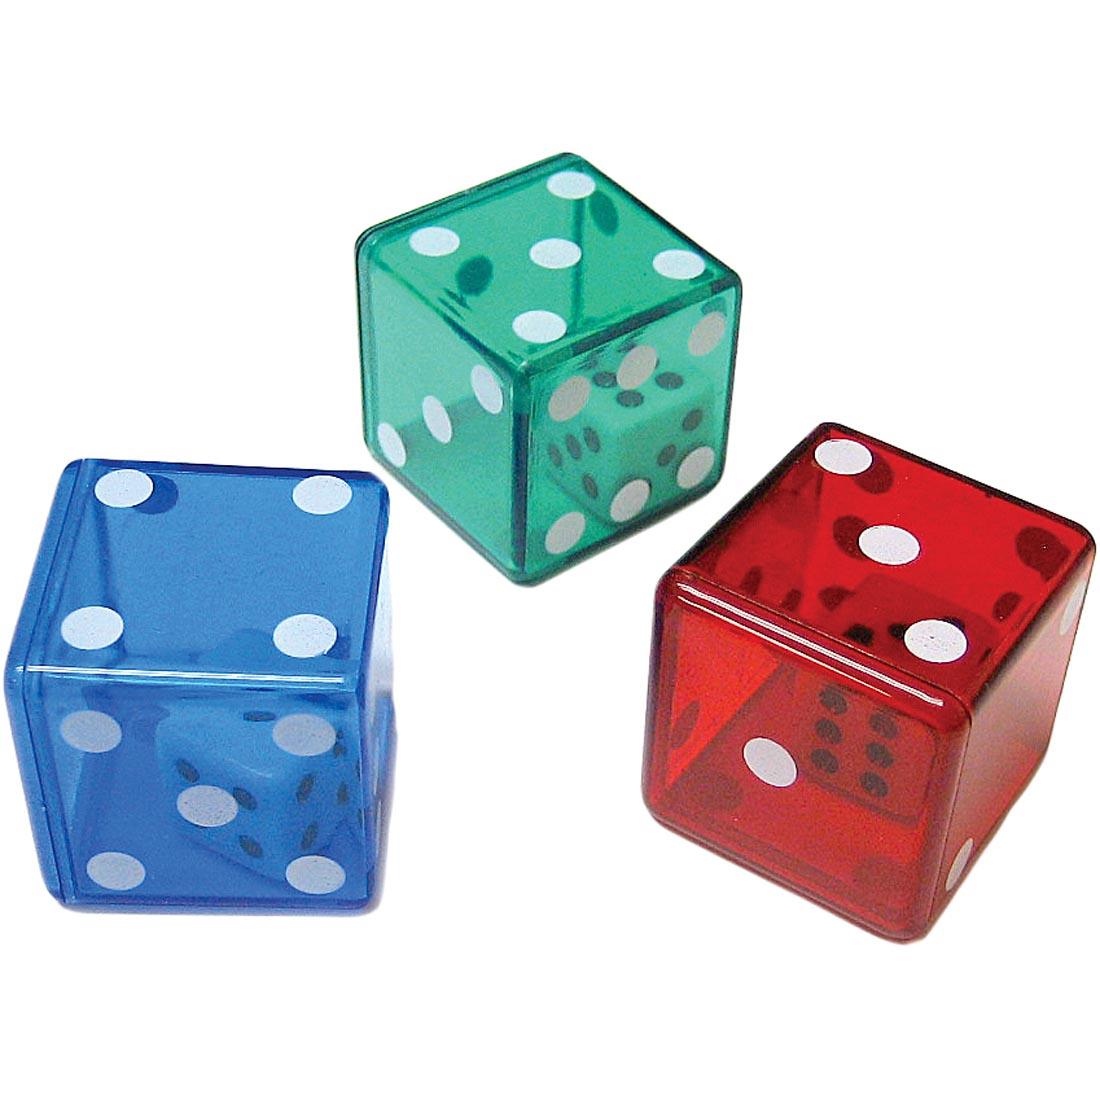 Dice within Dice